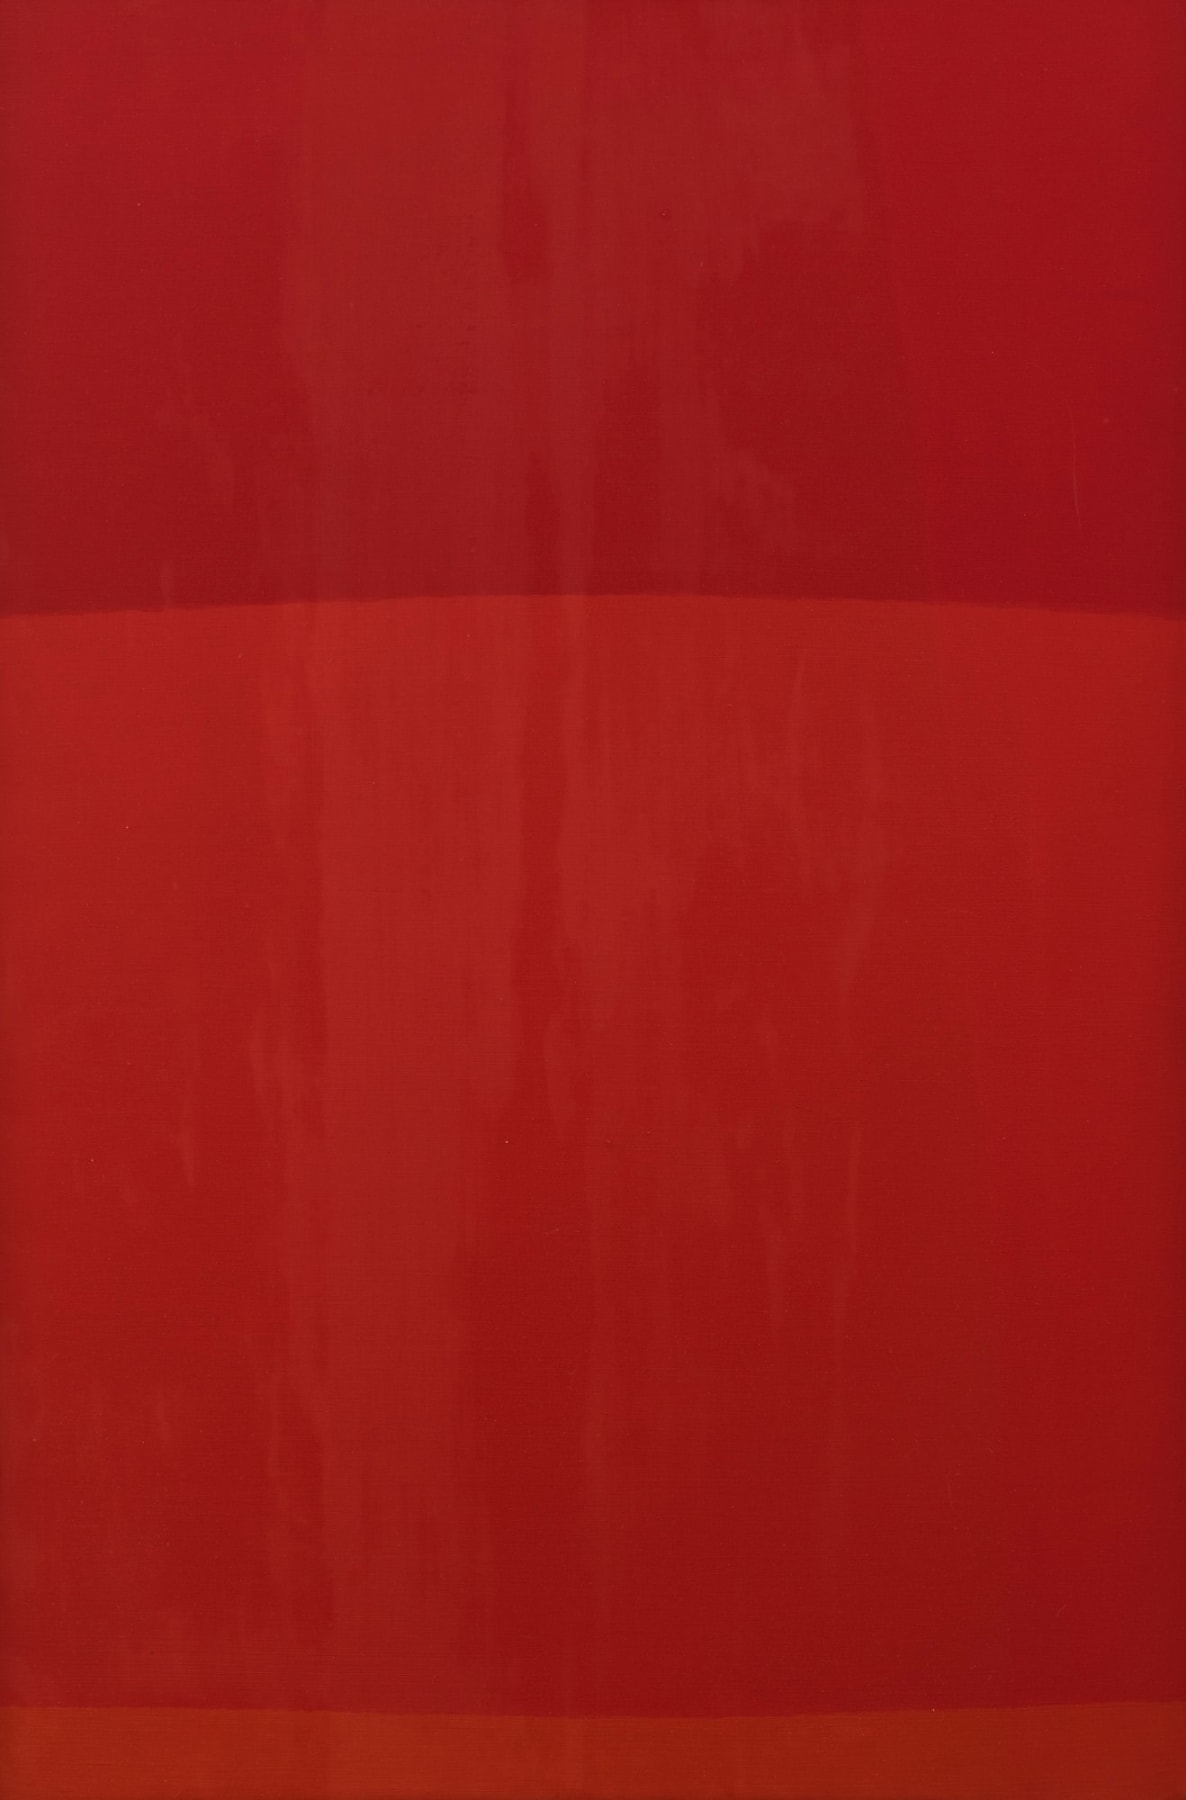 Felrath Hines, Red Painting, 1968